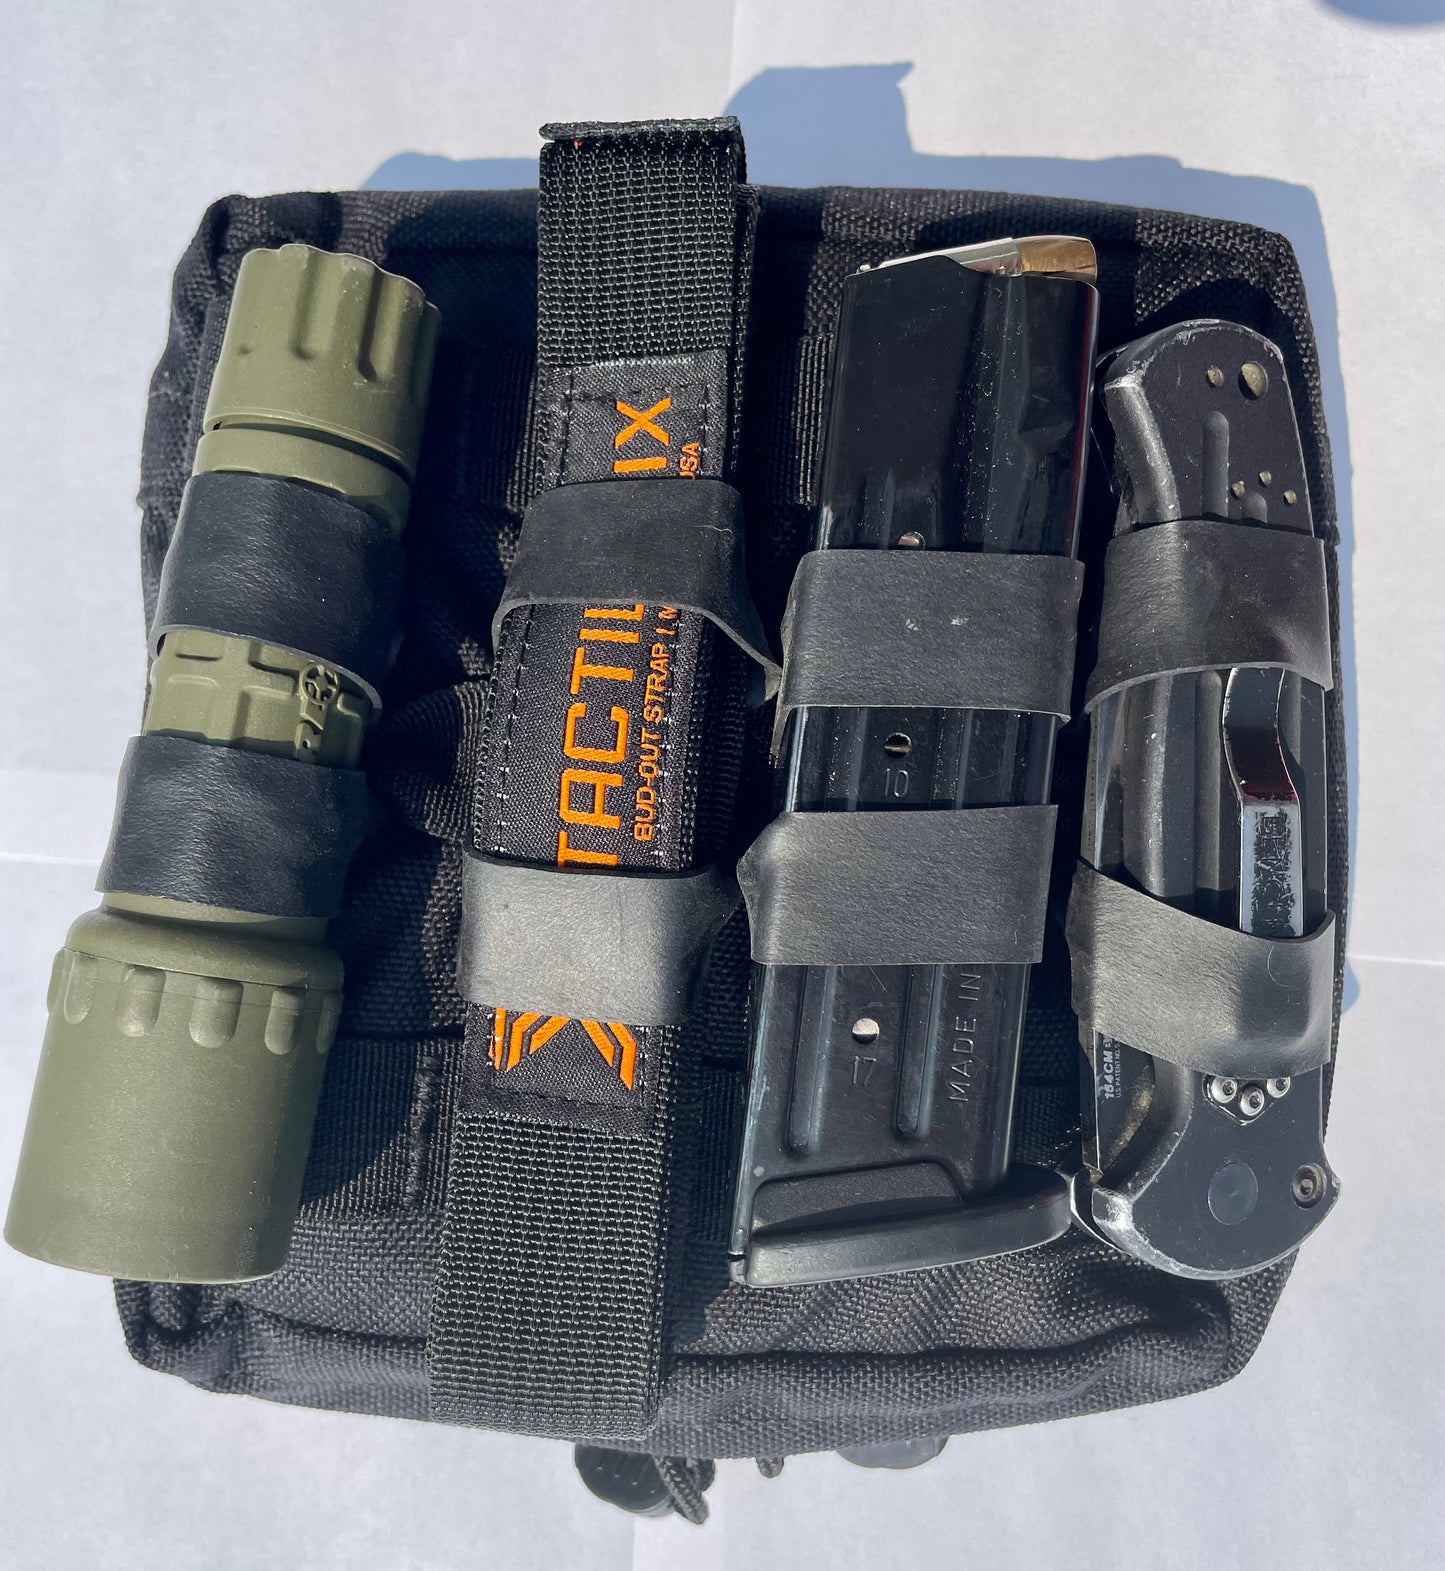 Universal Molle Webbing Attachment Kit - 10 Pack